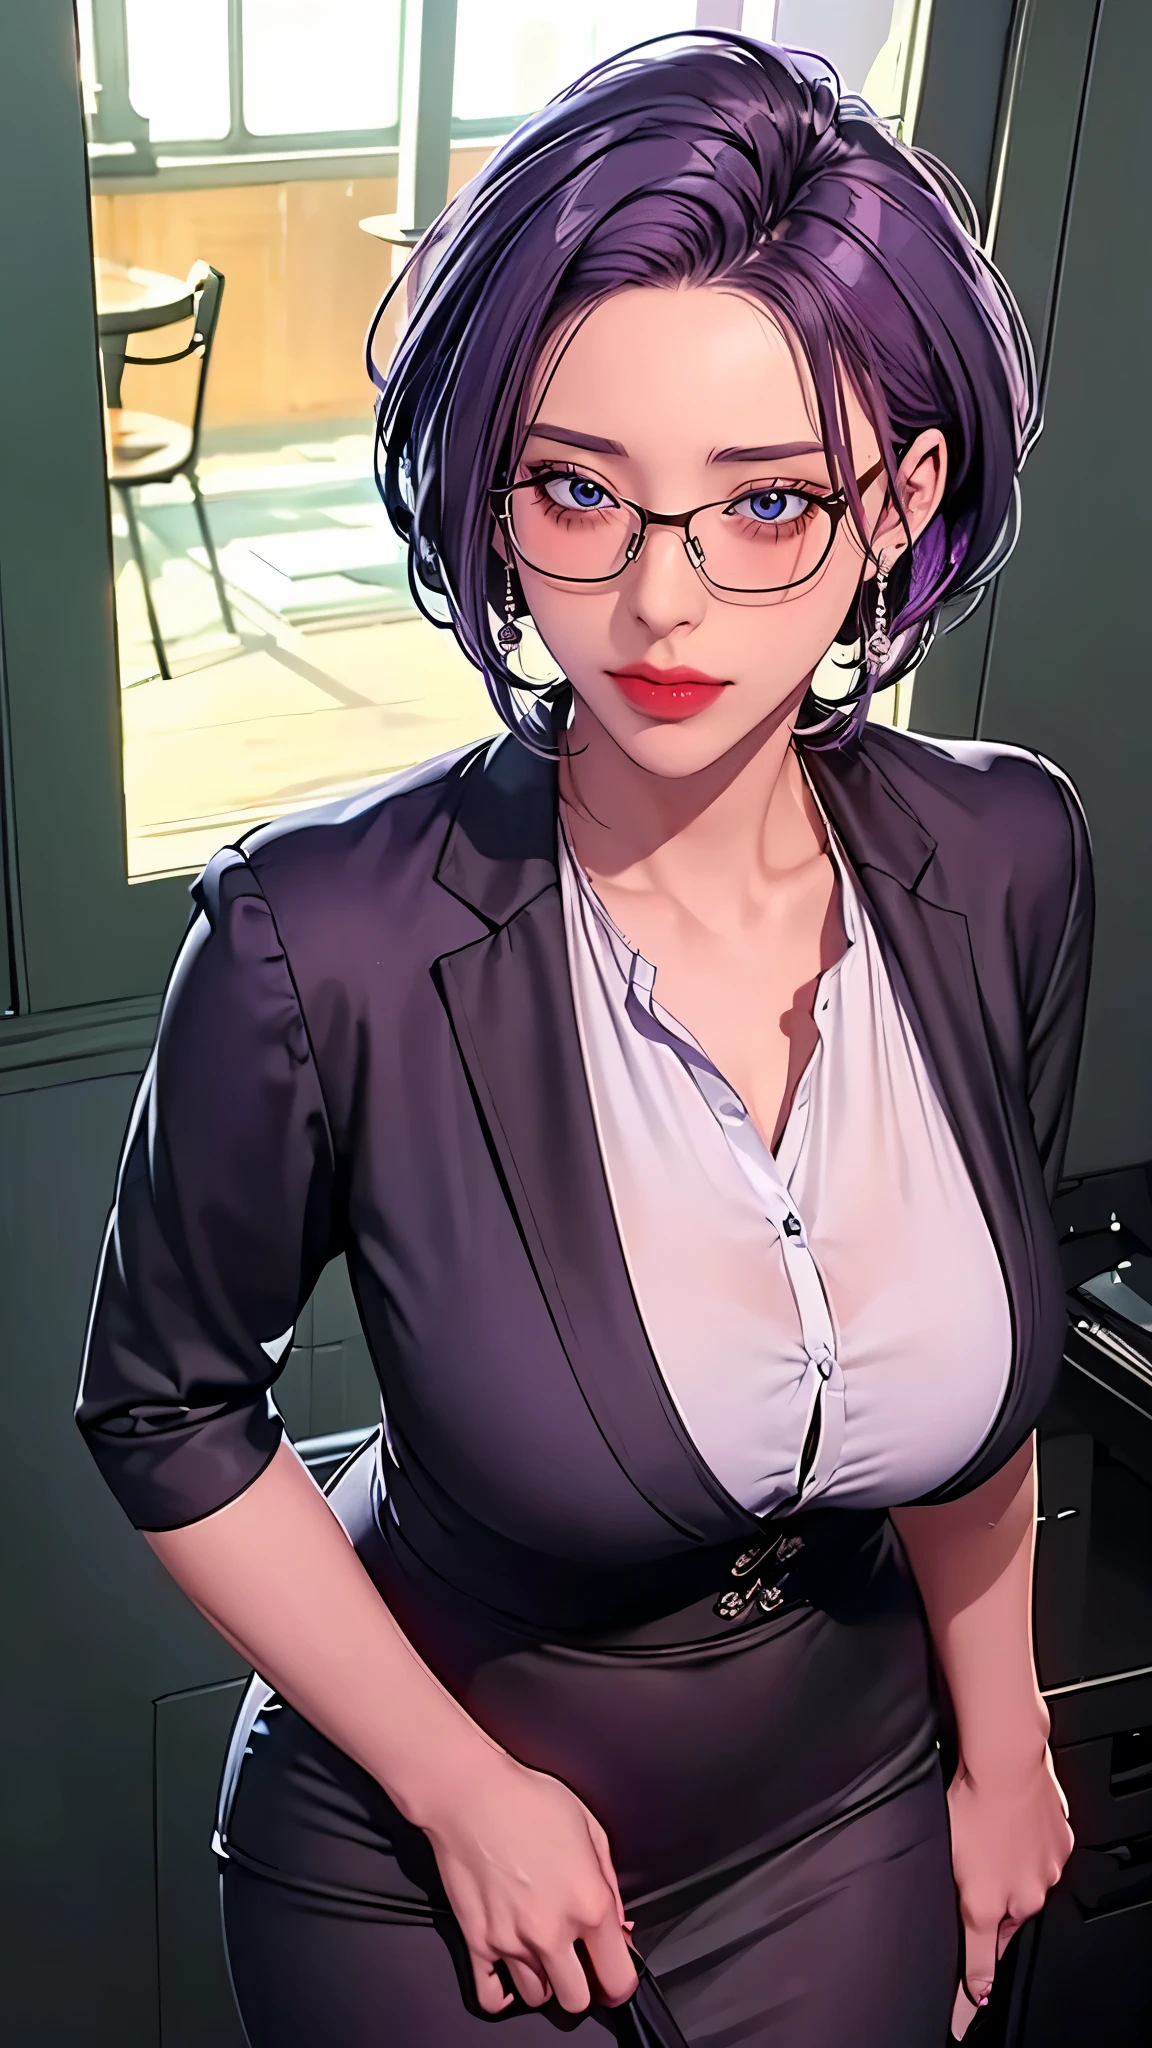 （（（Perfect figure，figure，suit， gray shirt，hip-covering skirt（（（JMT,Glasses,purple hair,short hair,purple eyes,MiJungdef，purple eyes，purple hair，medium hair，）））型figure:1.7））），((masterpiece)),high resolution, ((Best quality at best))，masterpiece，quality，Best quality，（（（ Exquisite facial features，looking at the audience,There is light in the eyes，Happy，nterlacing of light and shadow，huge boobs））），（（（looking into camera，black background，looking at viewer
standing
from above)）））